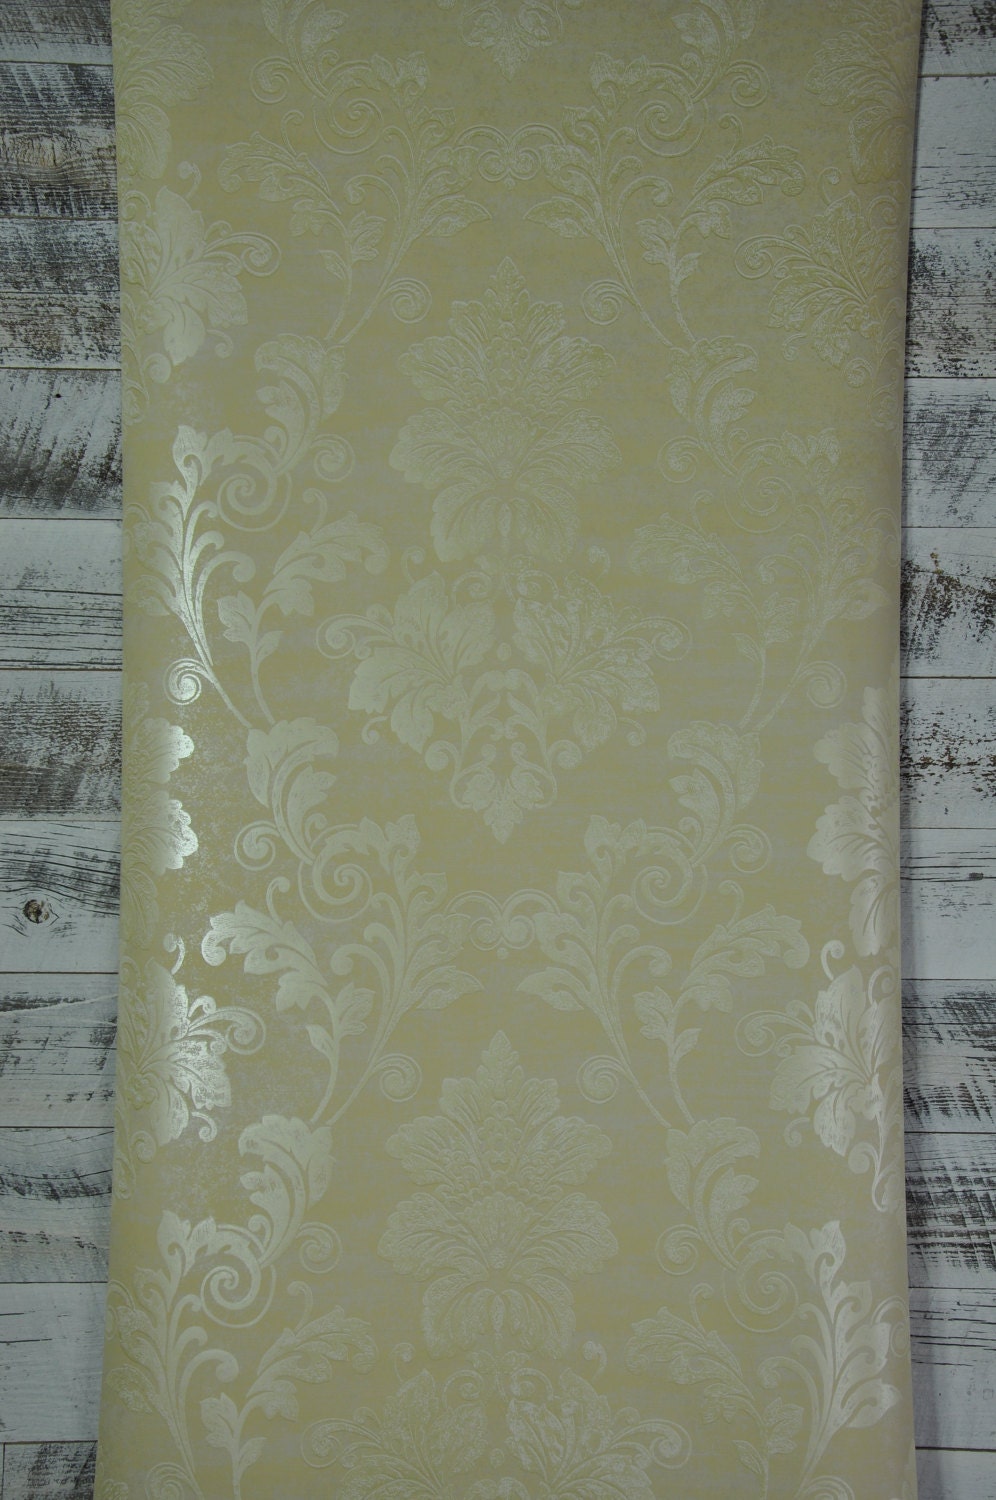 Elegant Cream And Gold Damask Wallpaper Ps3802 Sold By The